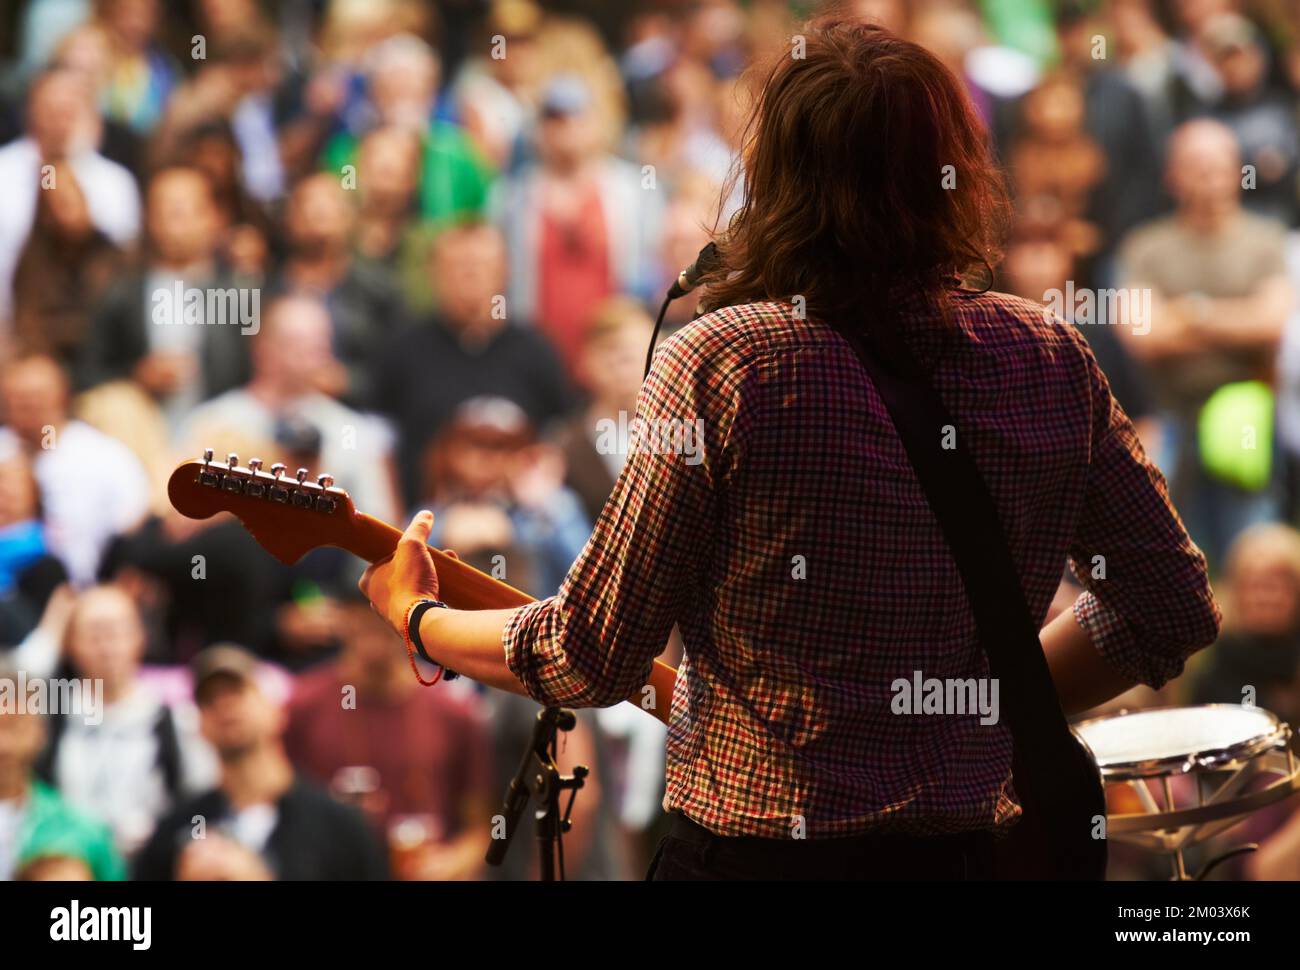 Ready to rock. a musicians feet on stage at an outdoor music festival. Stock Photo